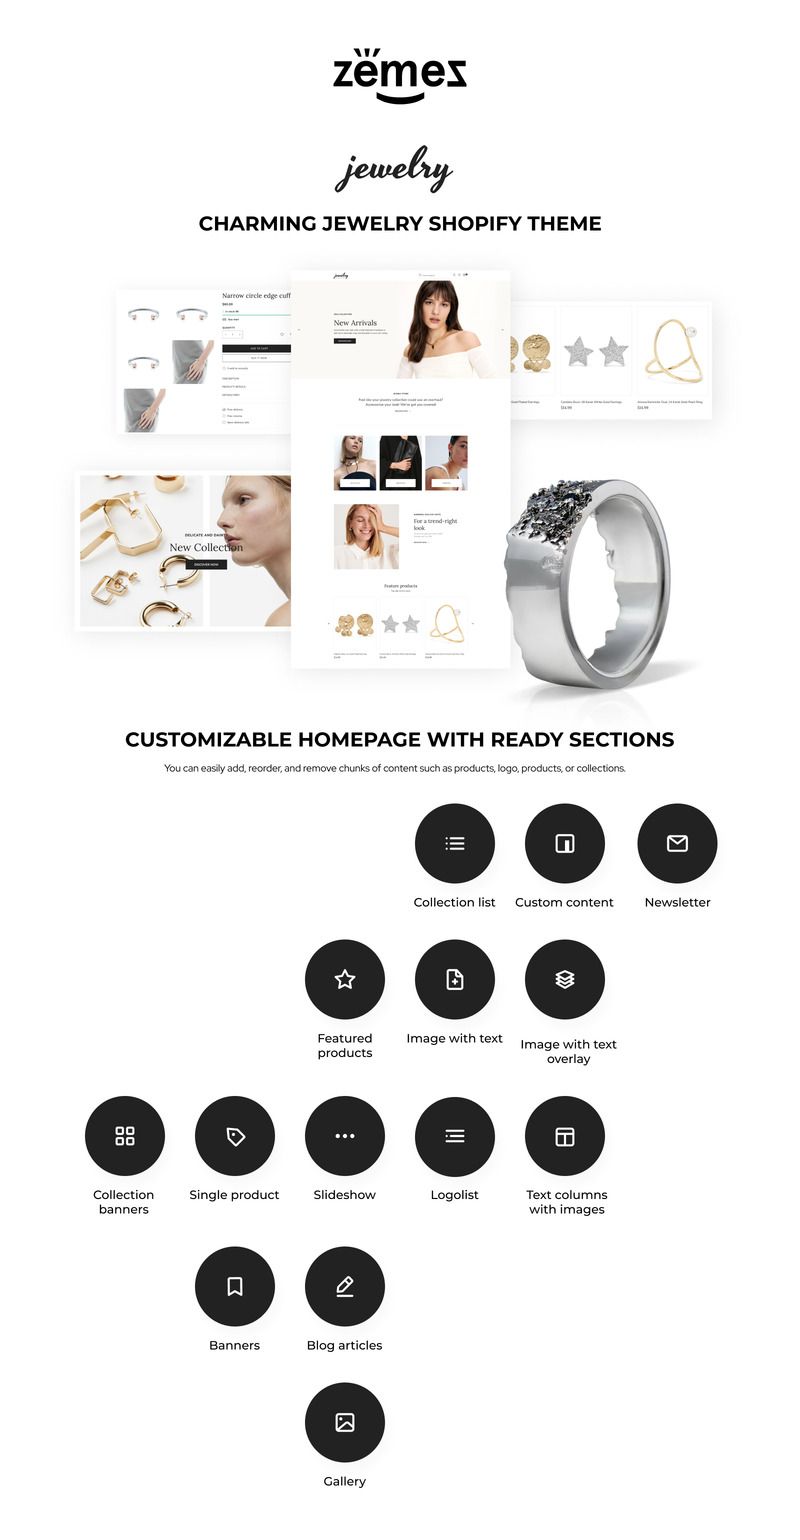 Charming Jewelry Online Store Shopify Theme - Features Image 1